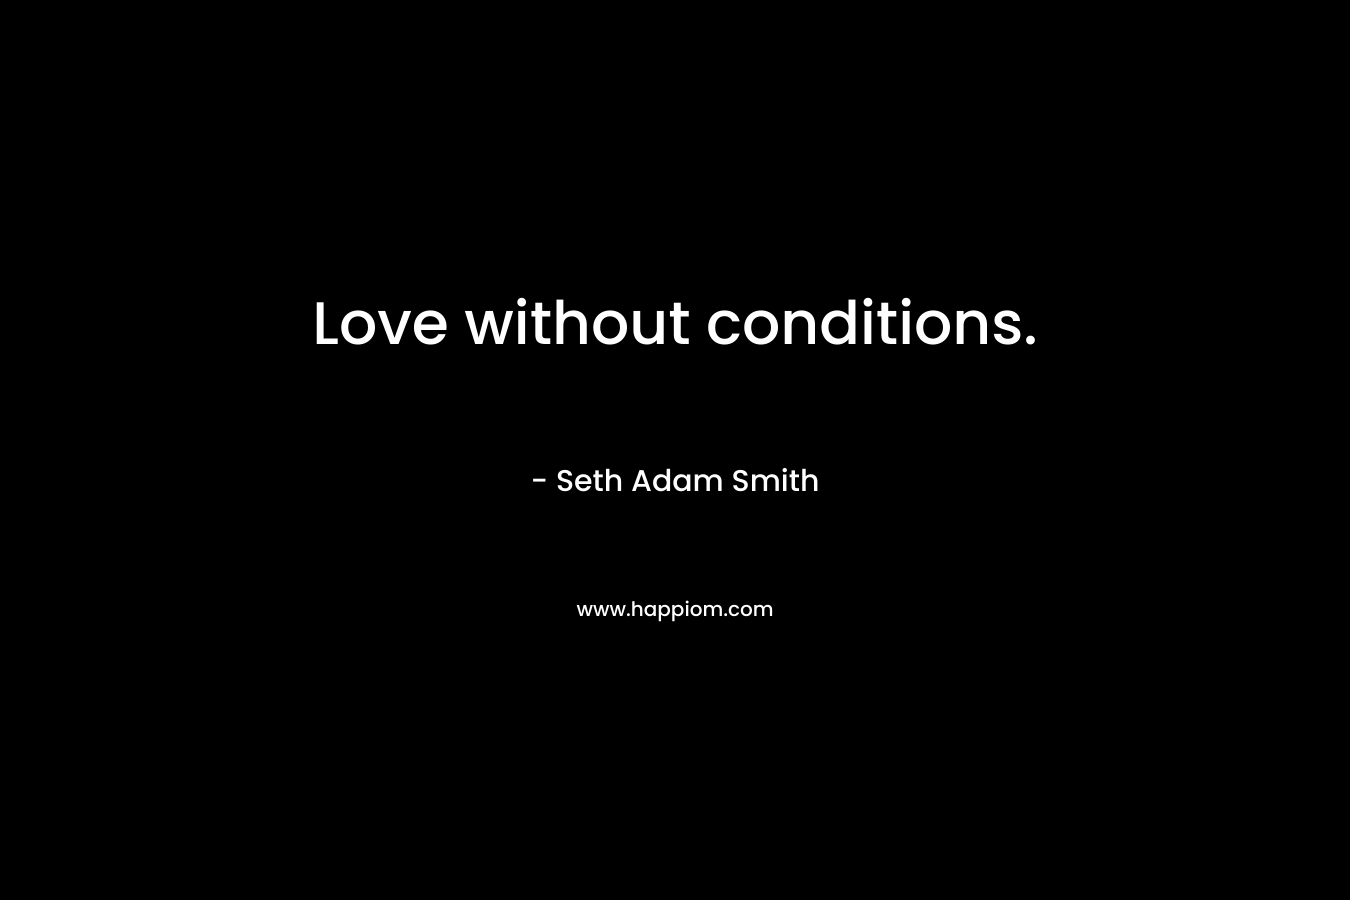 Love without conditions. – Seth Adam Smith